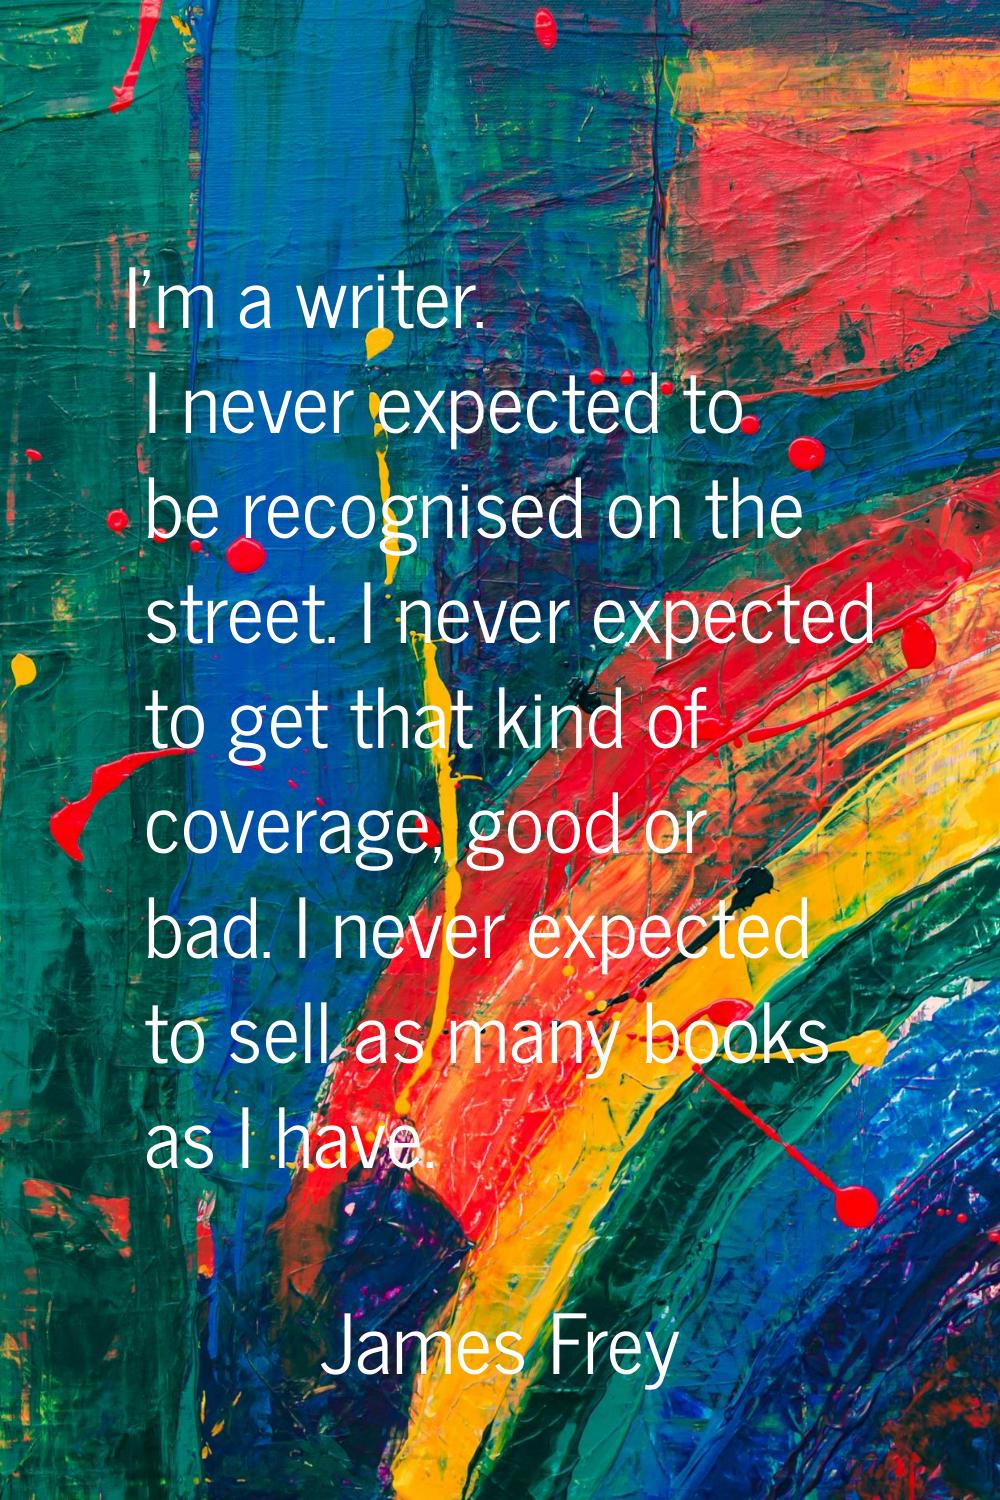 I'm a writer. I never expected to be recognised on the street. I never expected to get that kind of